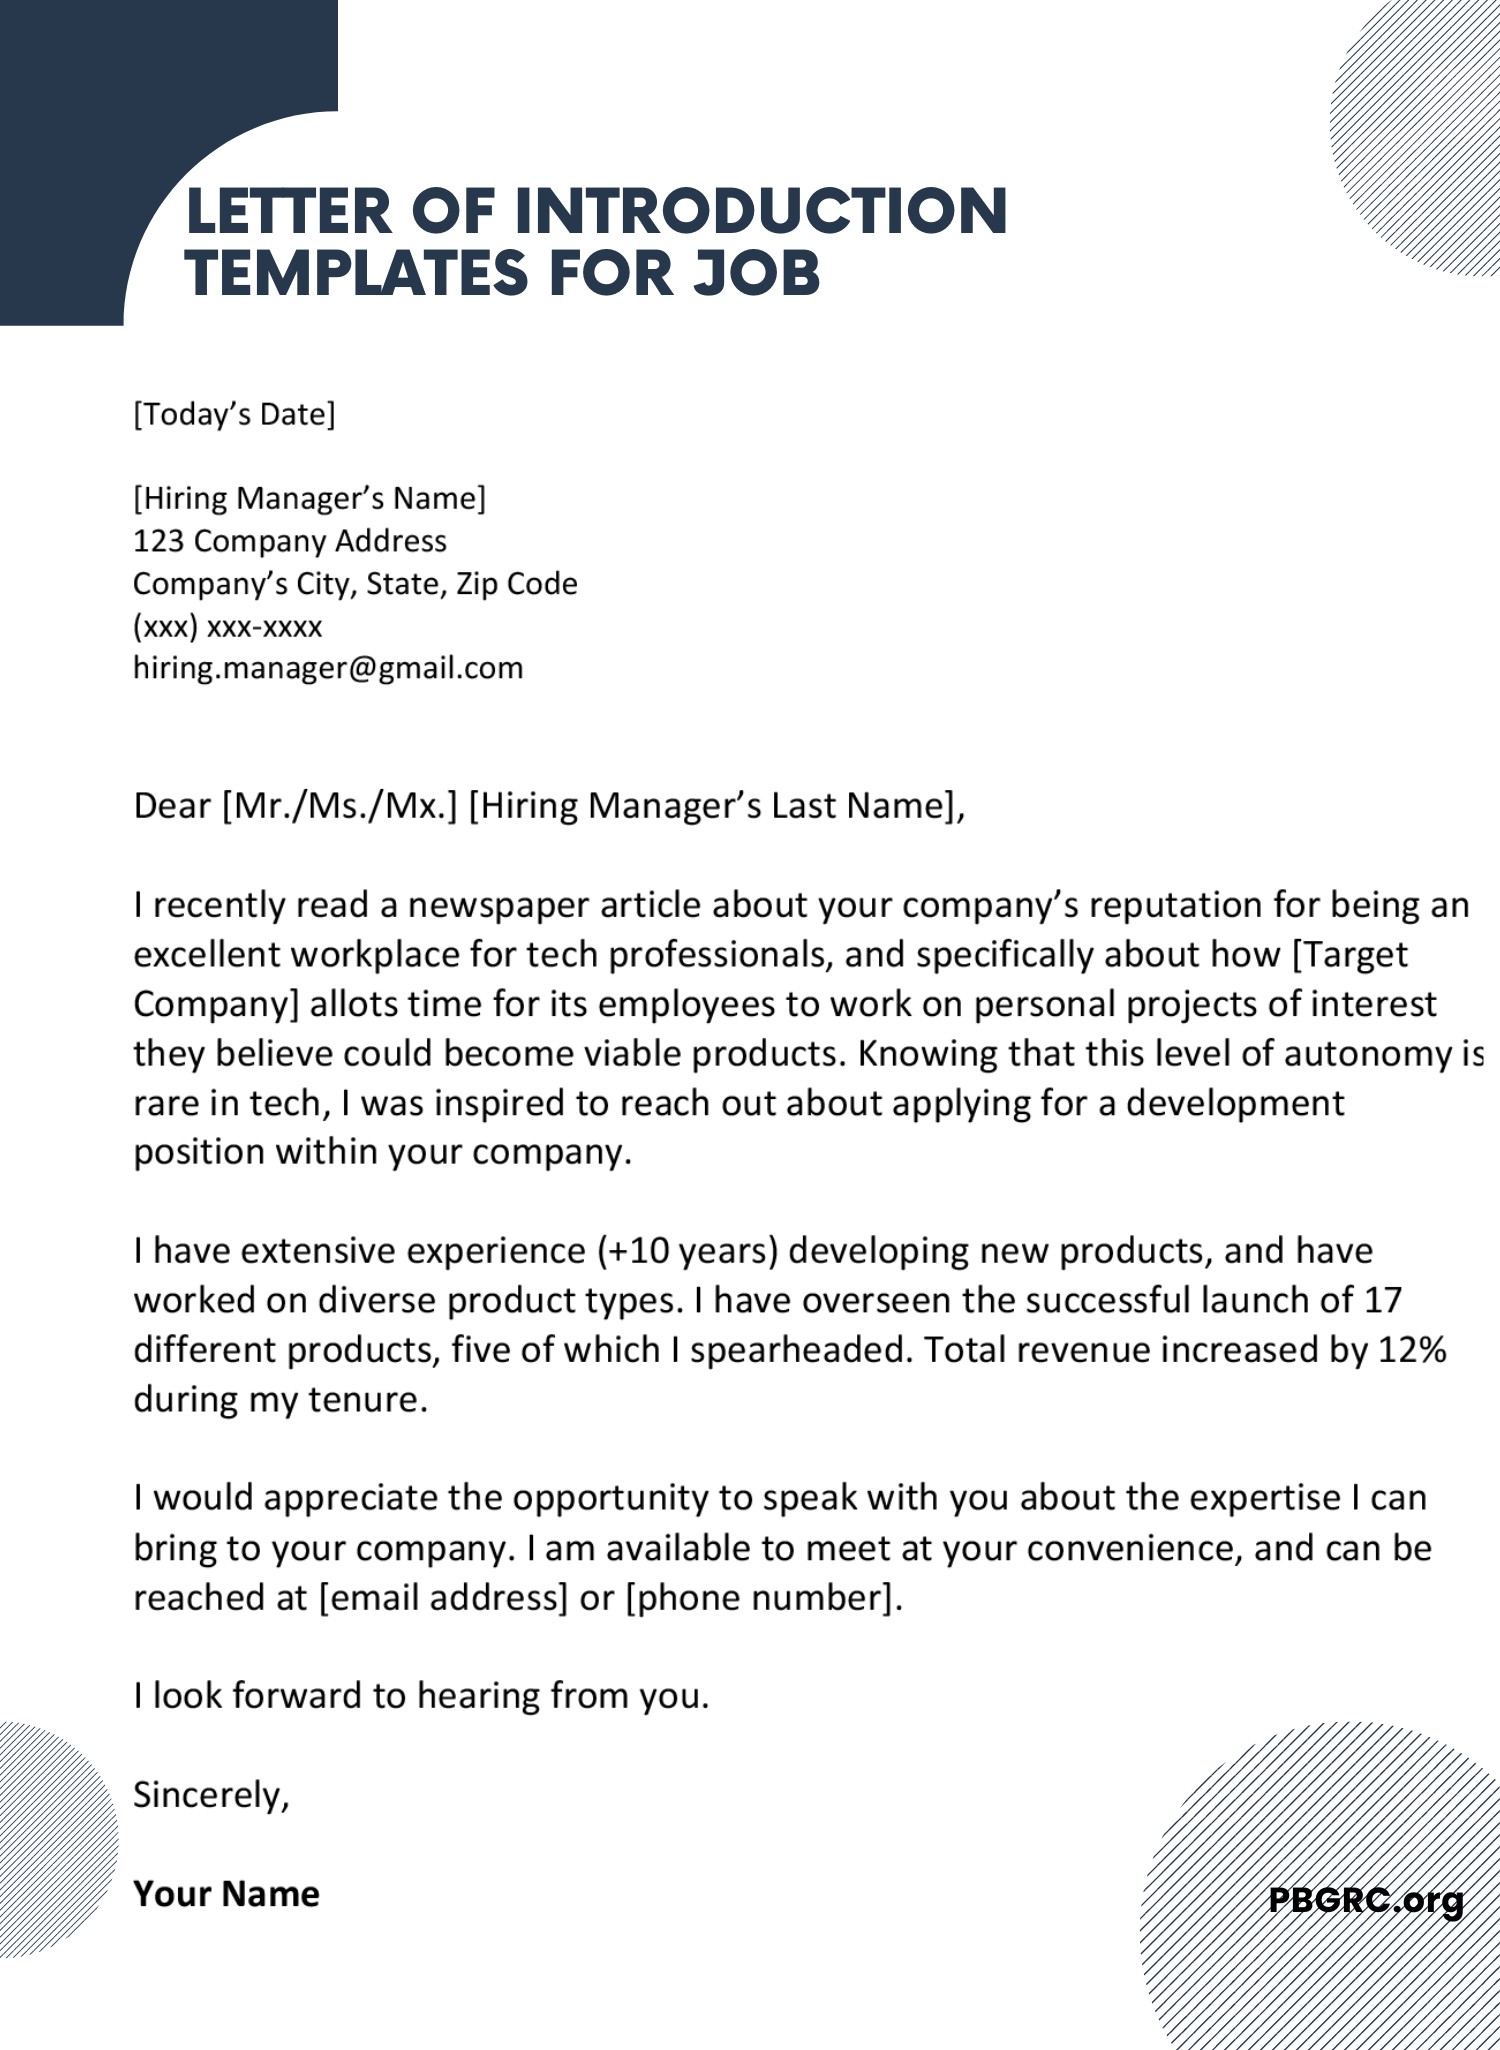 Sample Letter of Introduction Template For Job